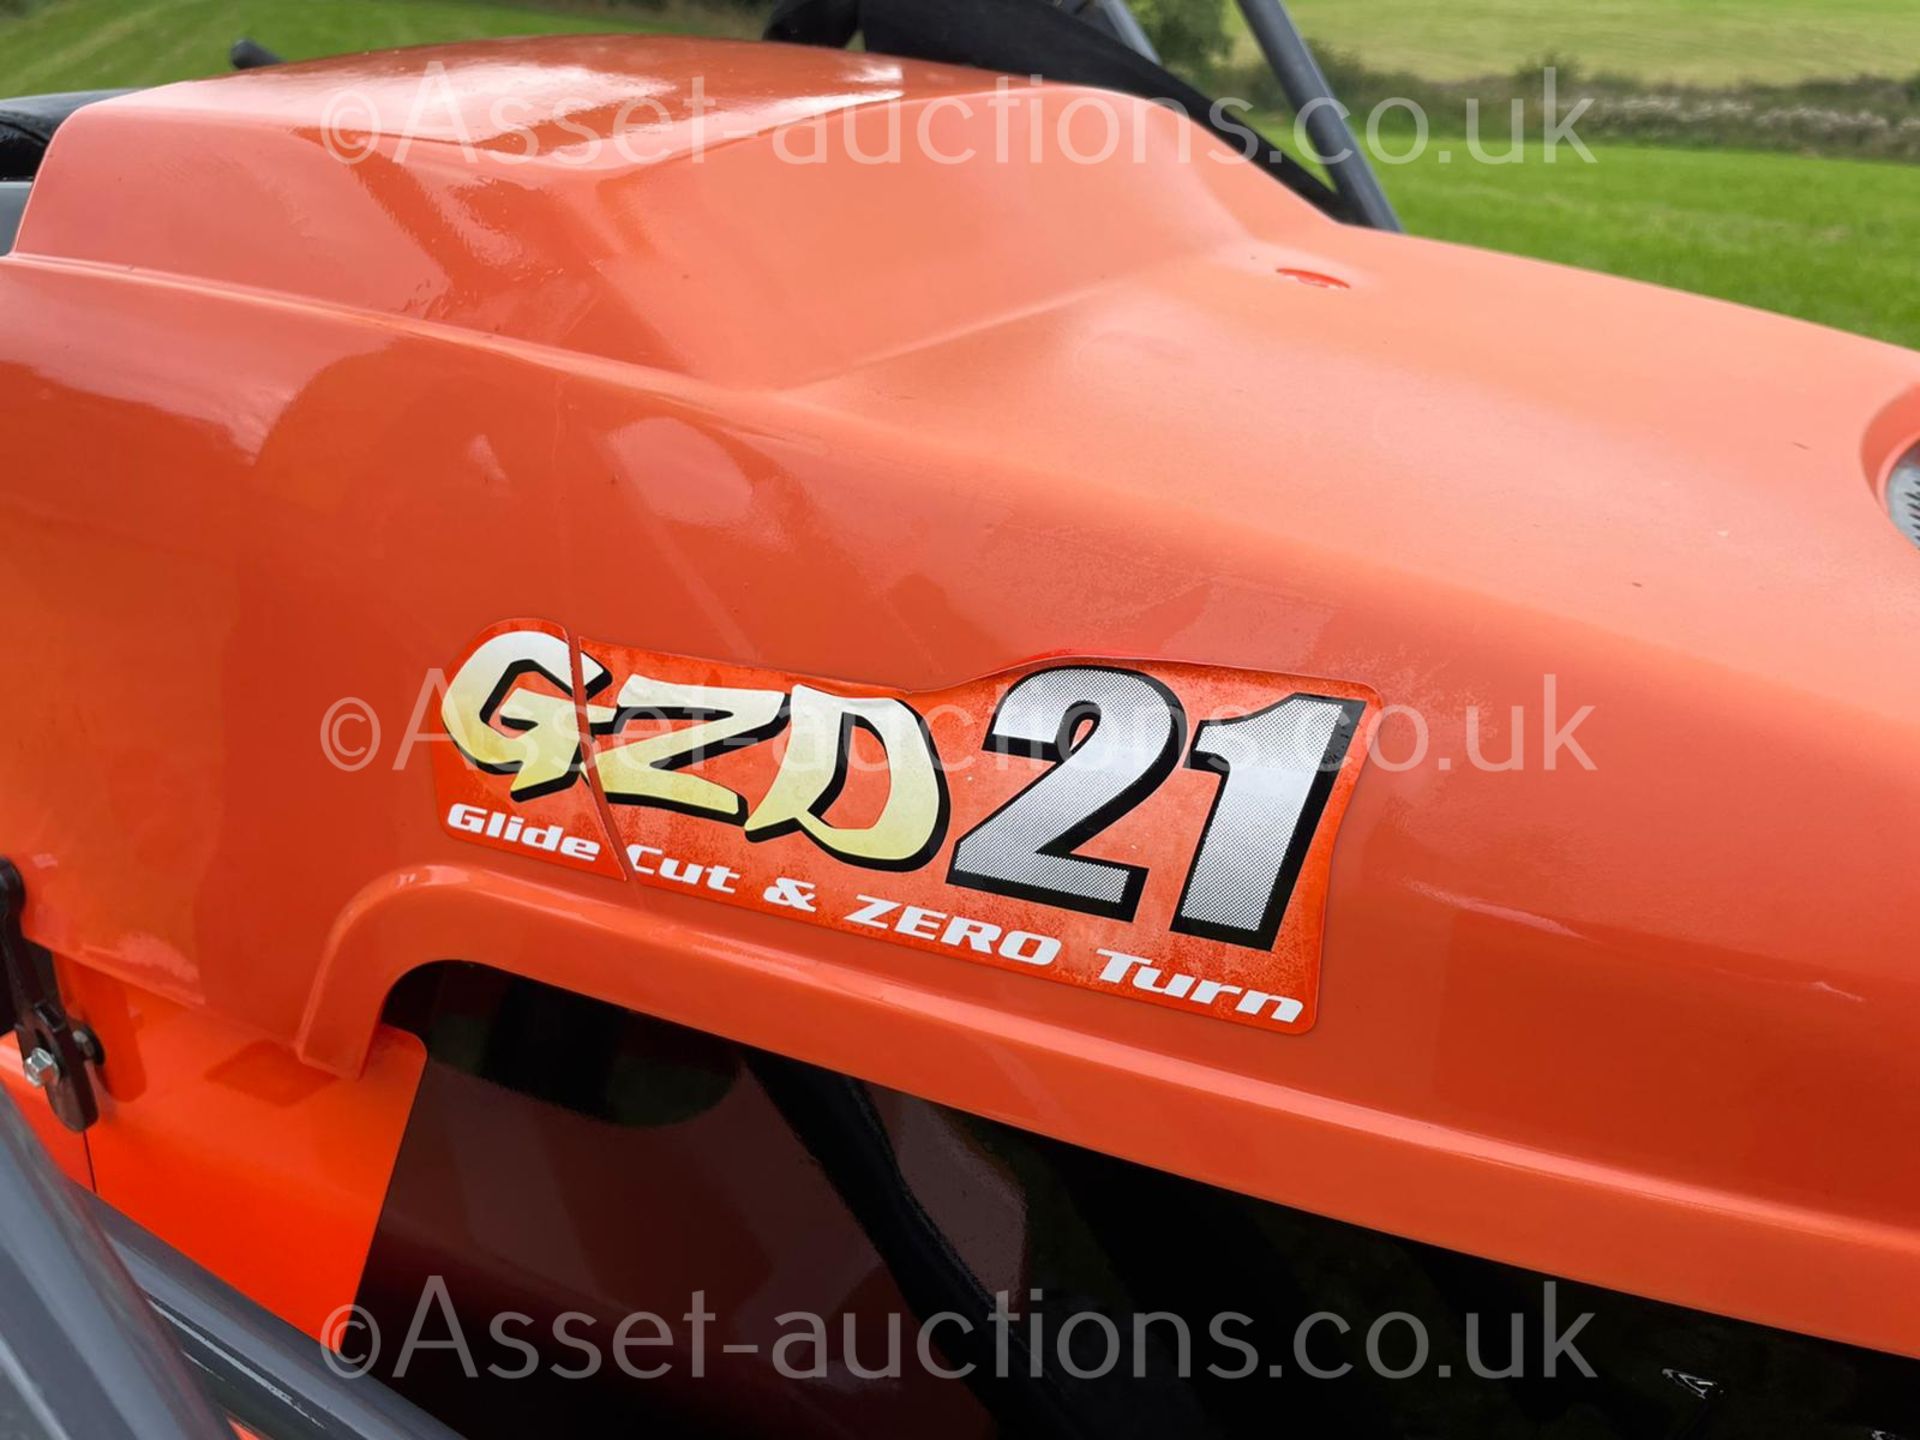 2015 KUBOTA GZD21 HIGH TIP ZERO TURN MOWER, RUNS, DRIVES CUTS AND COLLECTS WELL *PLUS VAT* - Image 13 of 13